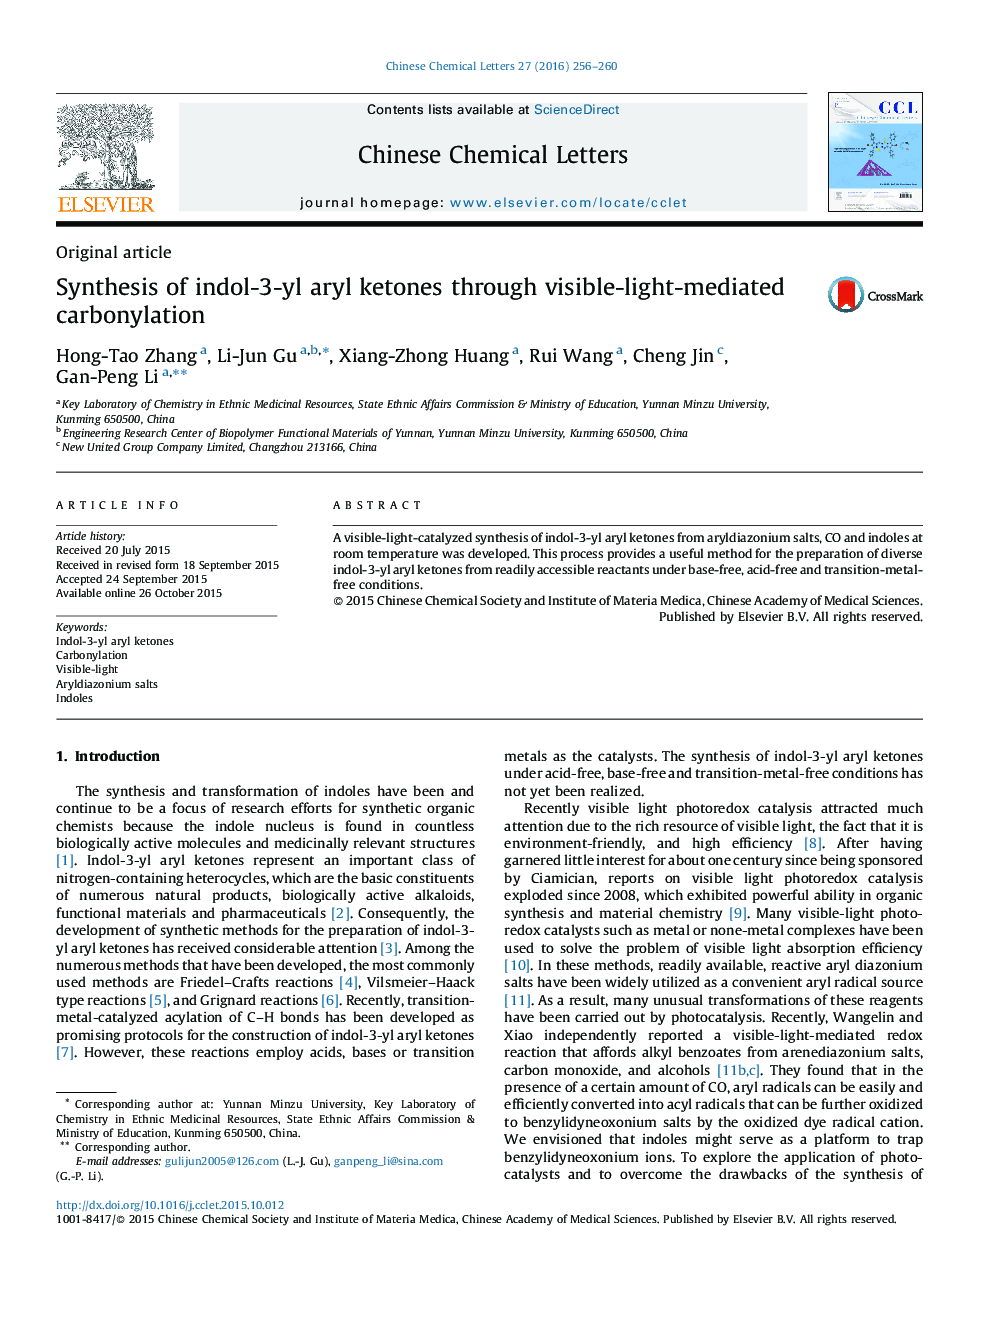 Synthesis of indol-3-yl aryl ketones through visible-light-mediated carbonylation